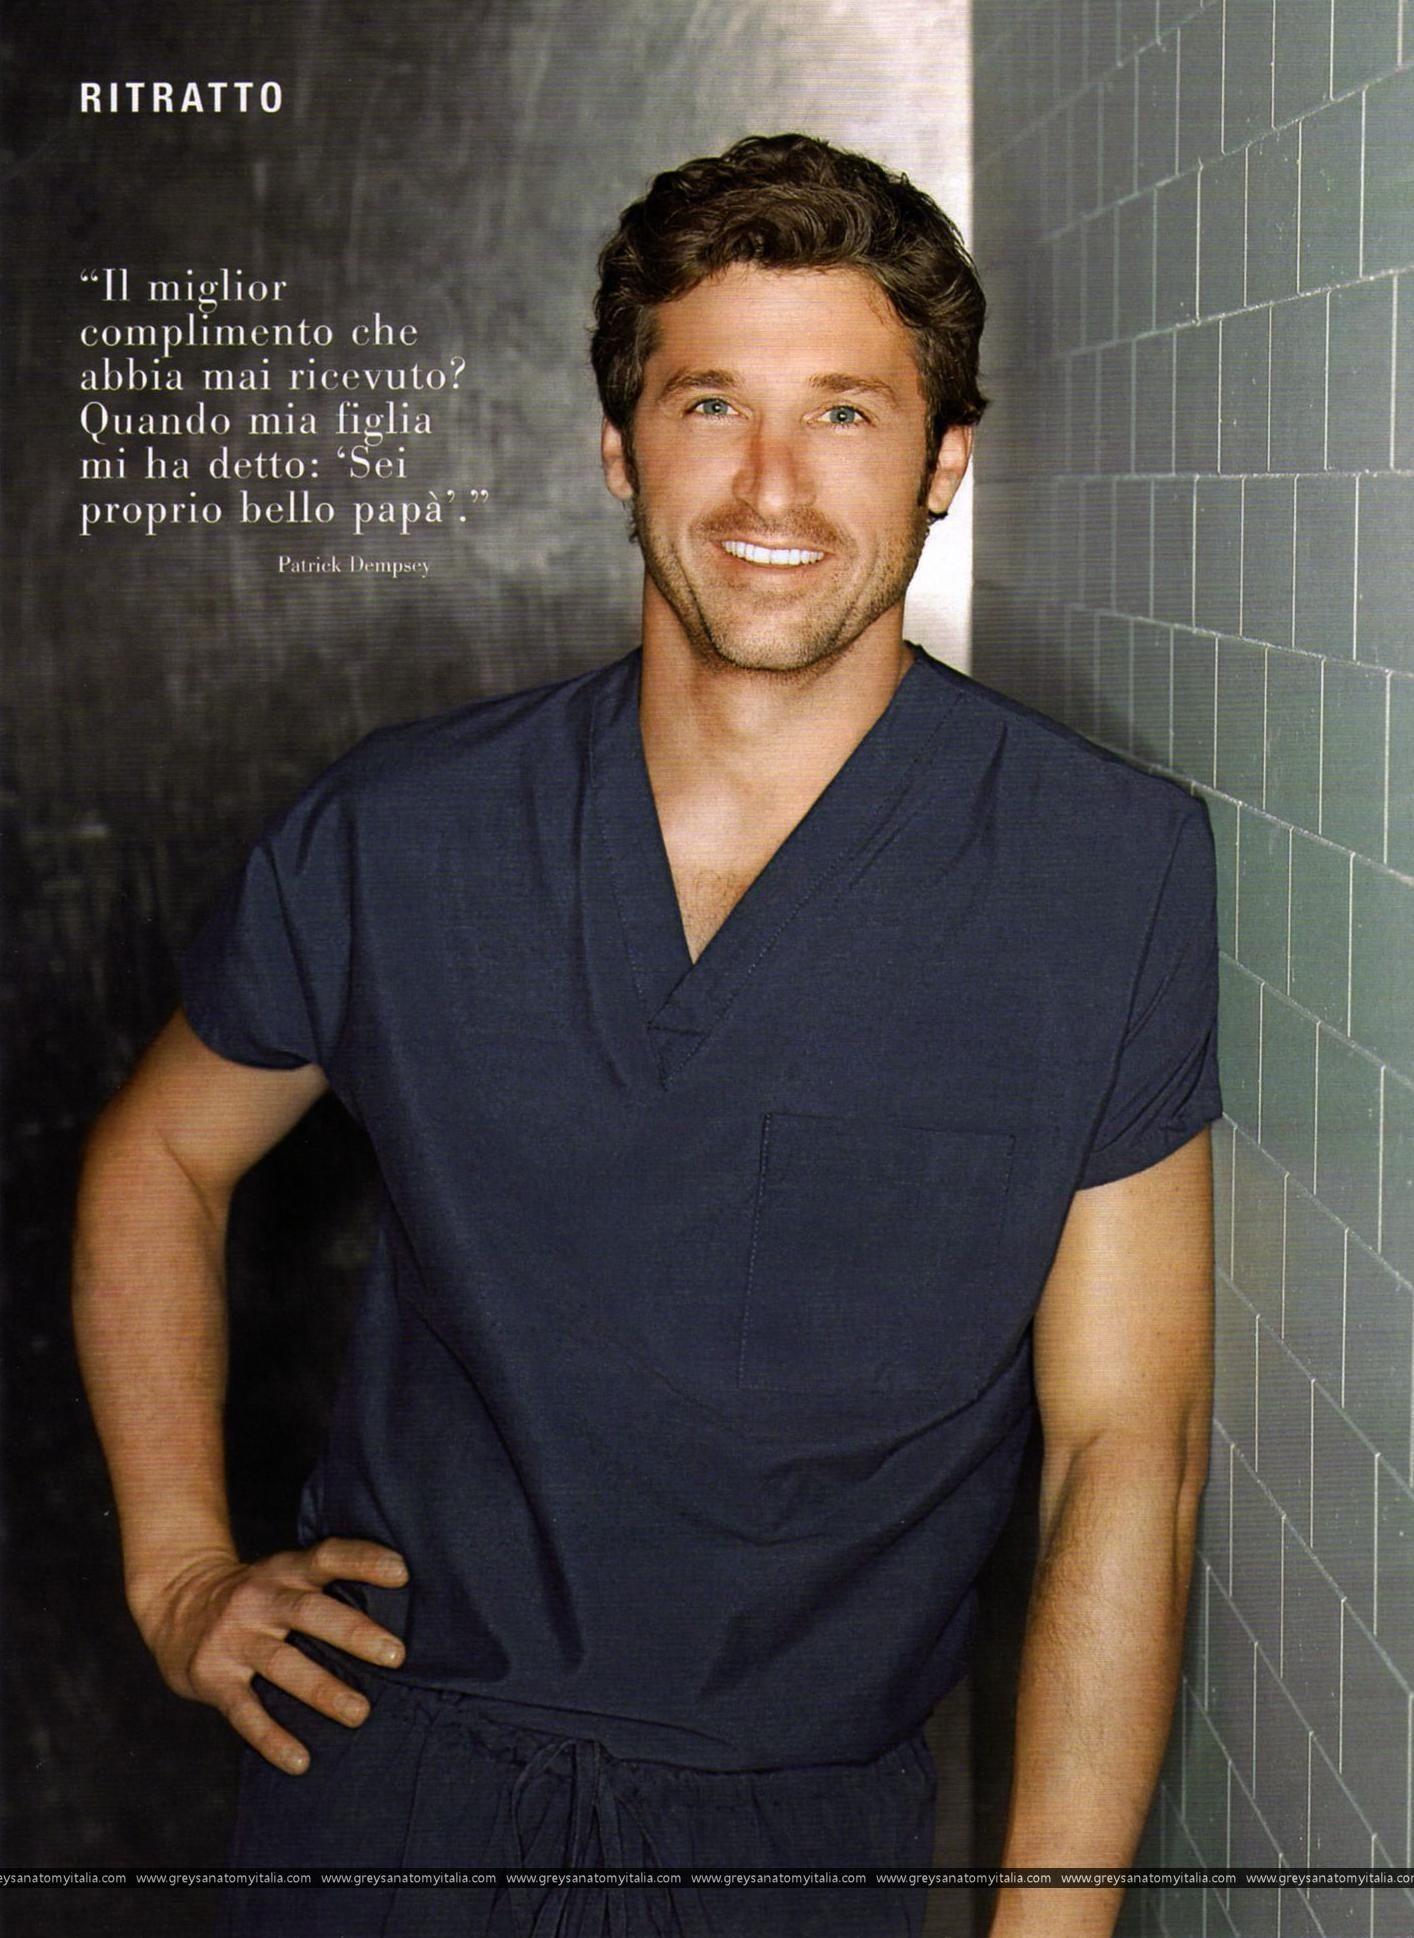 Patrick Dempsey image Magazine scans HD wallpaper and background